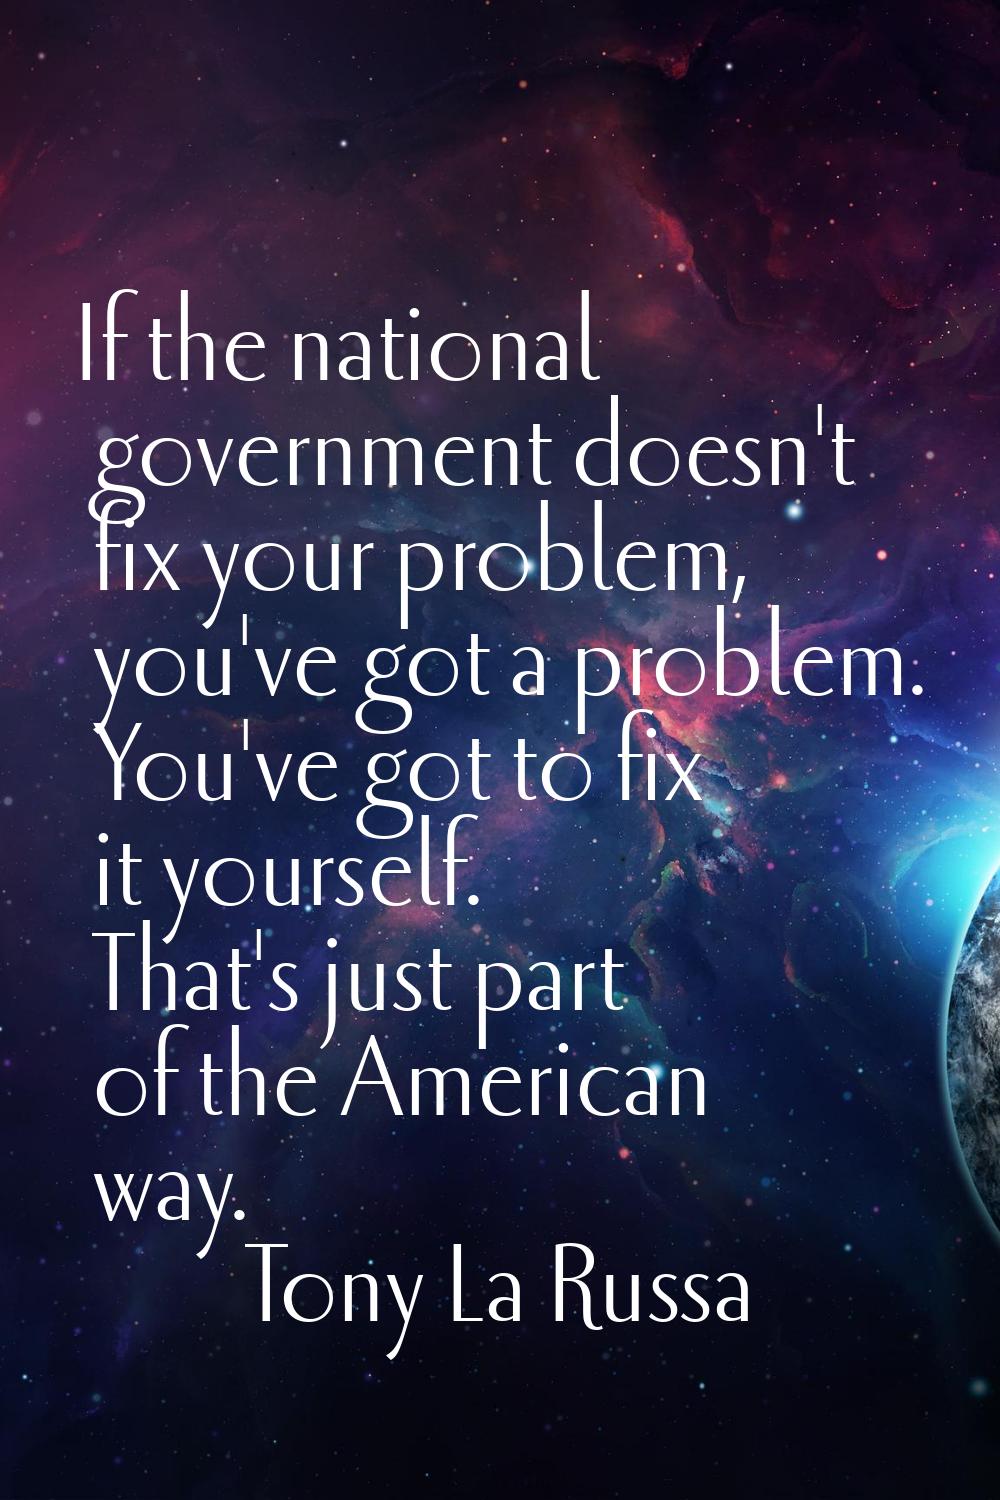 If the national government doesn't fix your problem, you've got a problem. You've got to fix it you